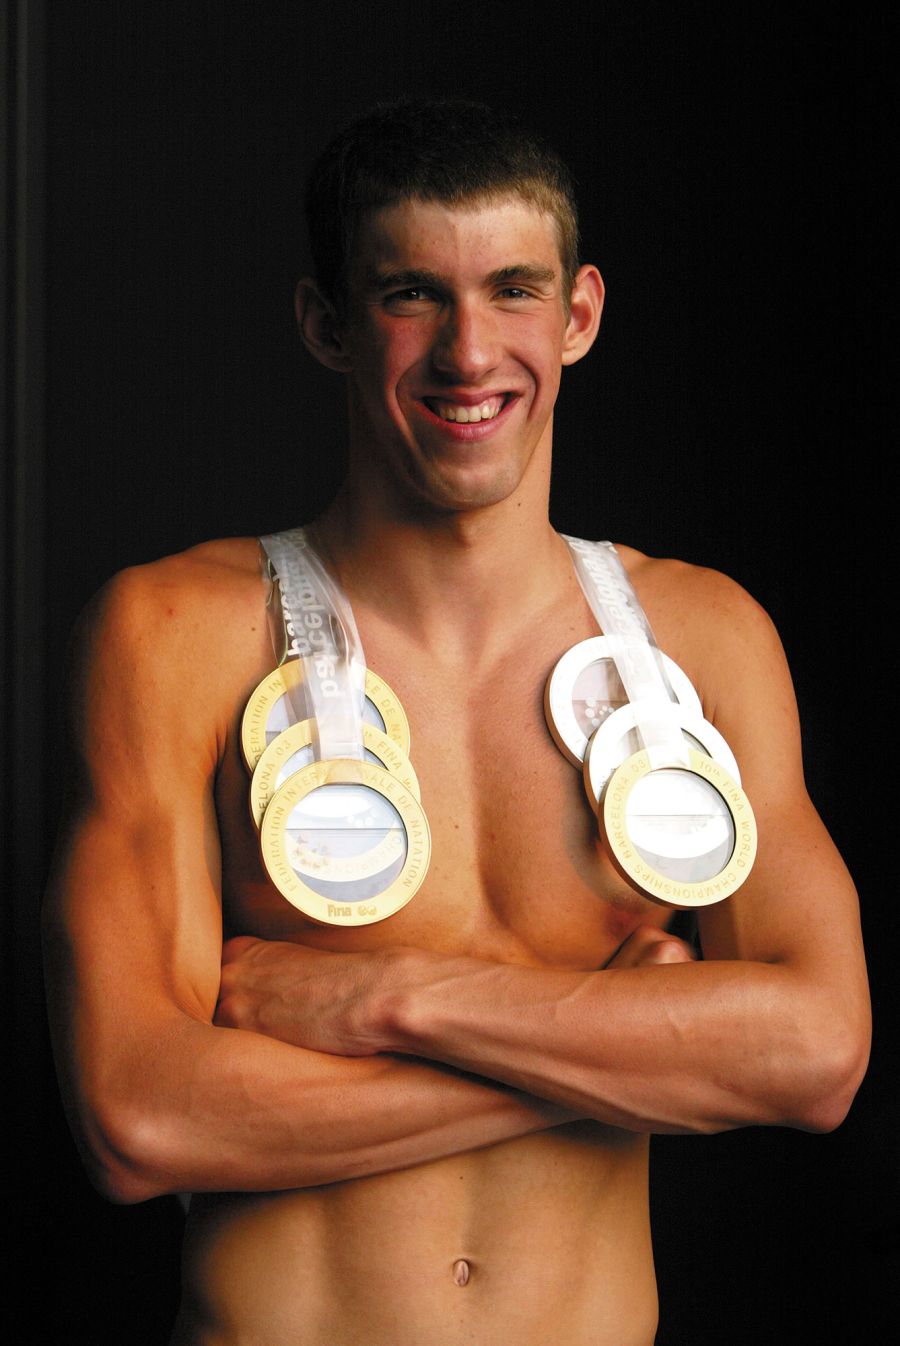 Michael Phelps Then Olympic Athletes Now and Then Gallery